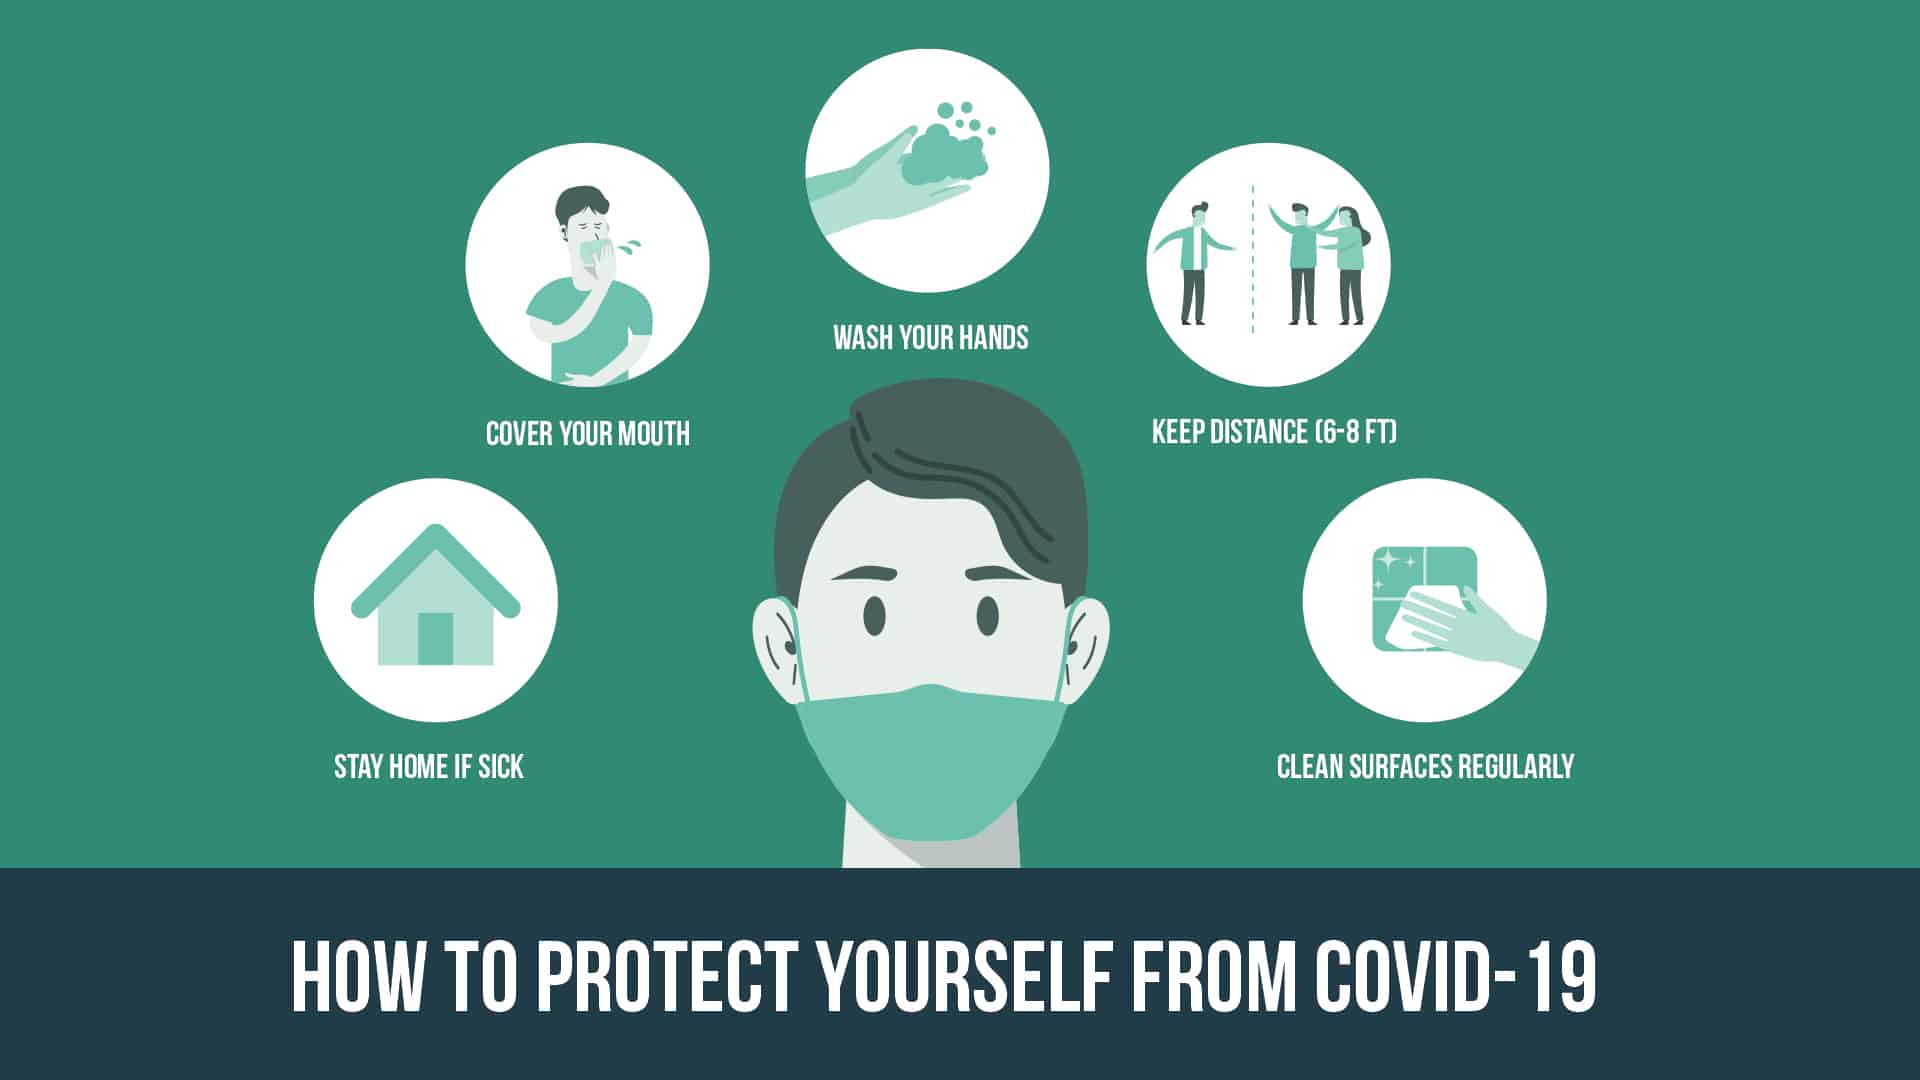 How to Protect Yourself from Covid-19 16 x 9 Decal - 2 pack